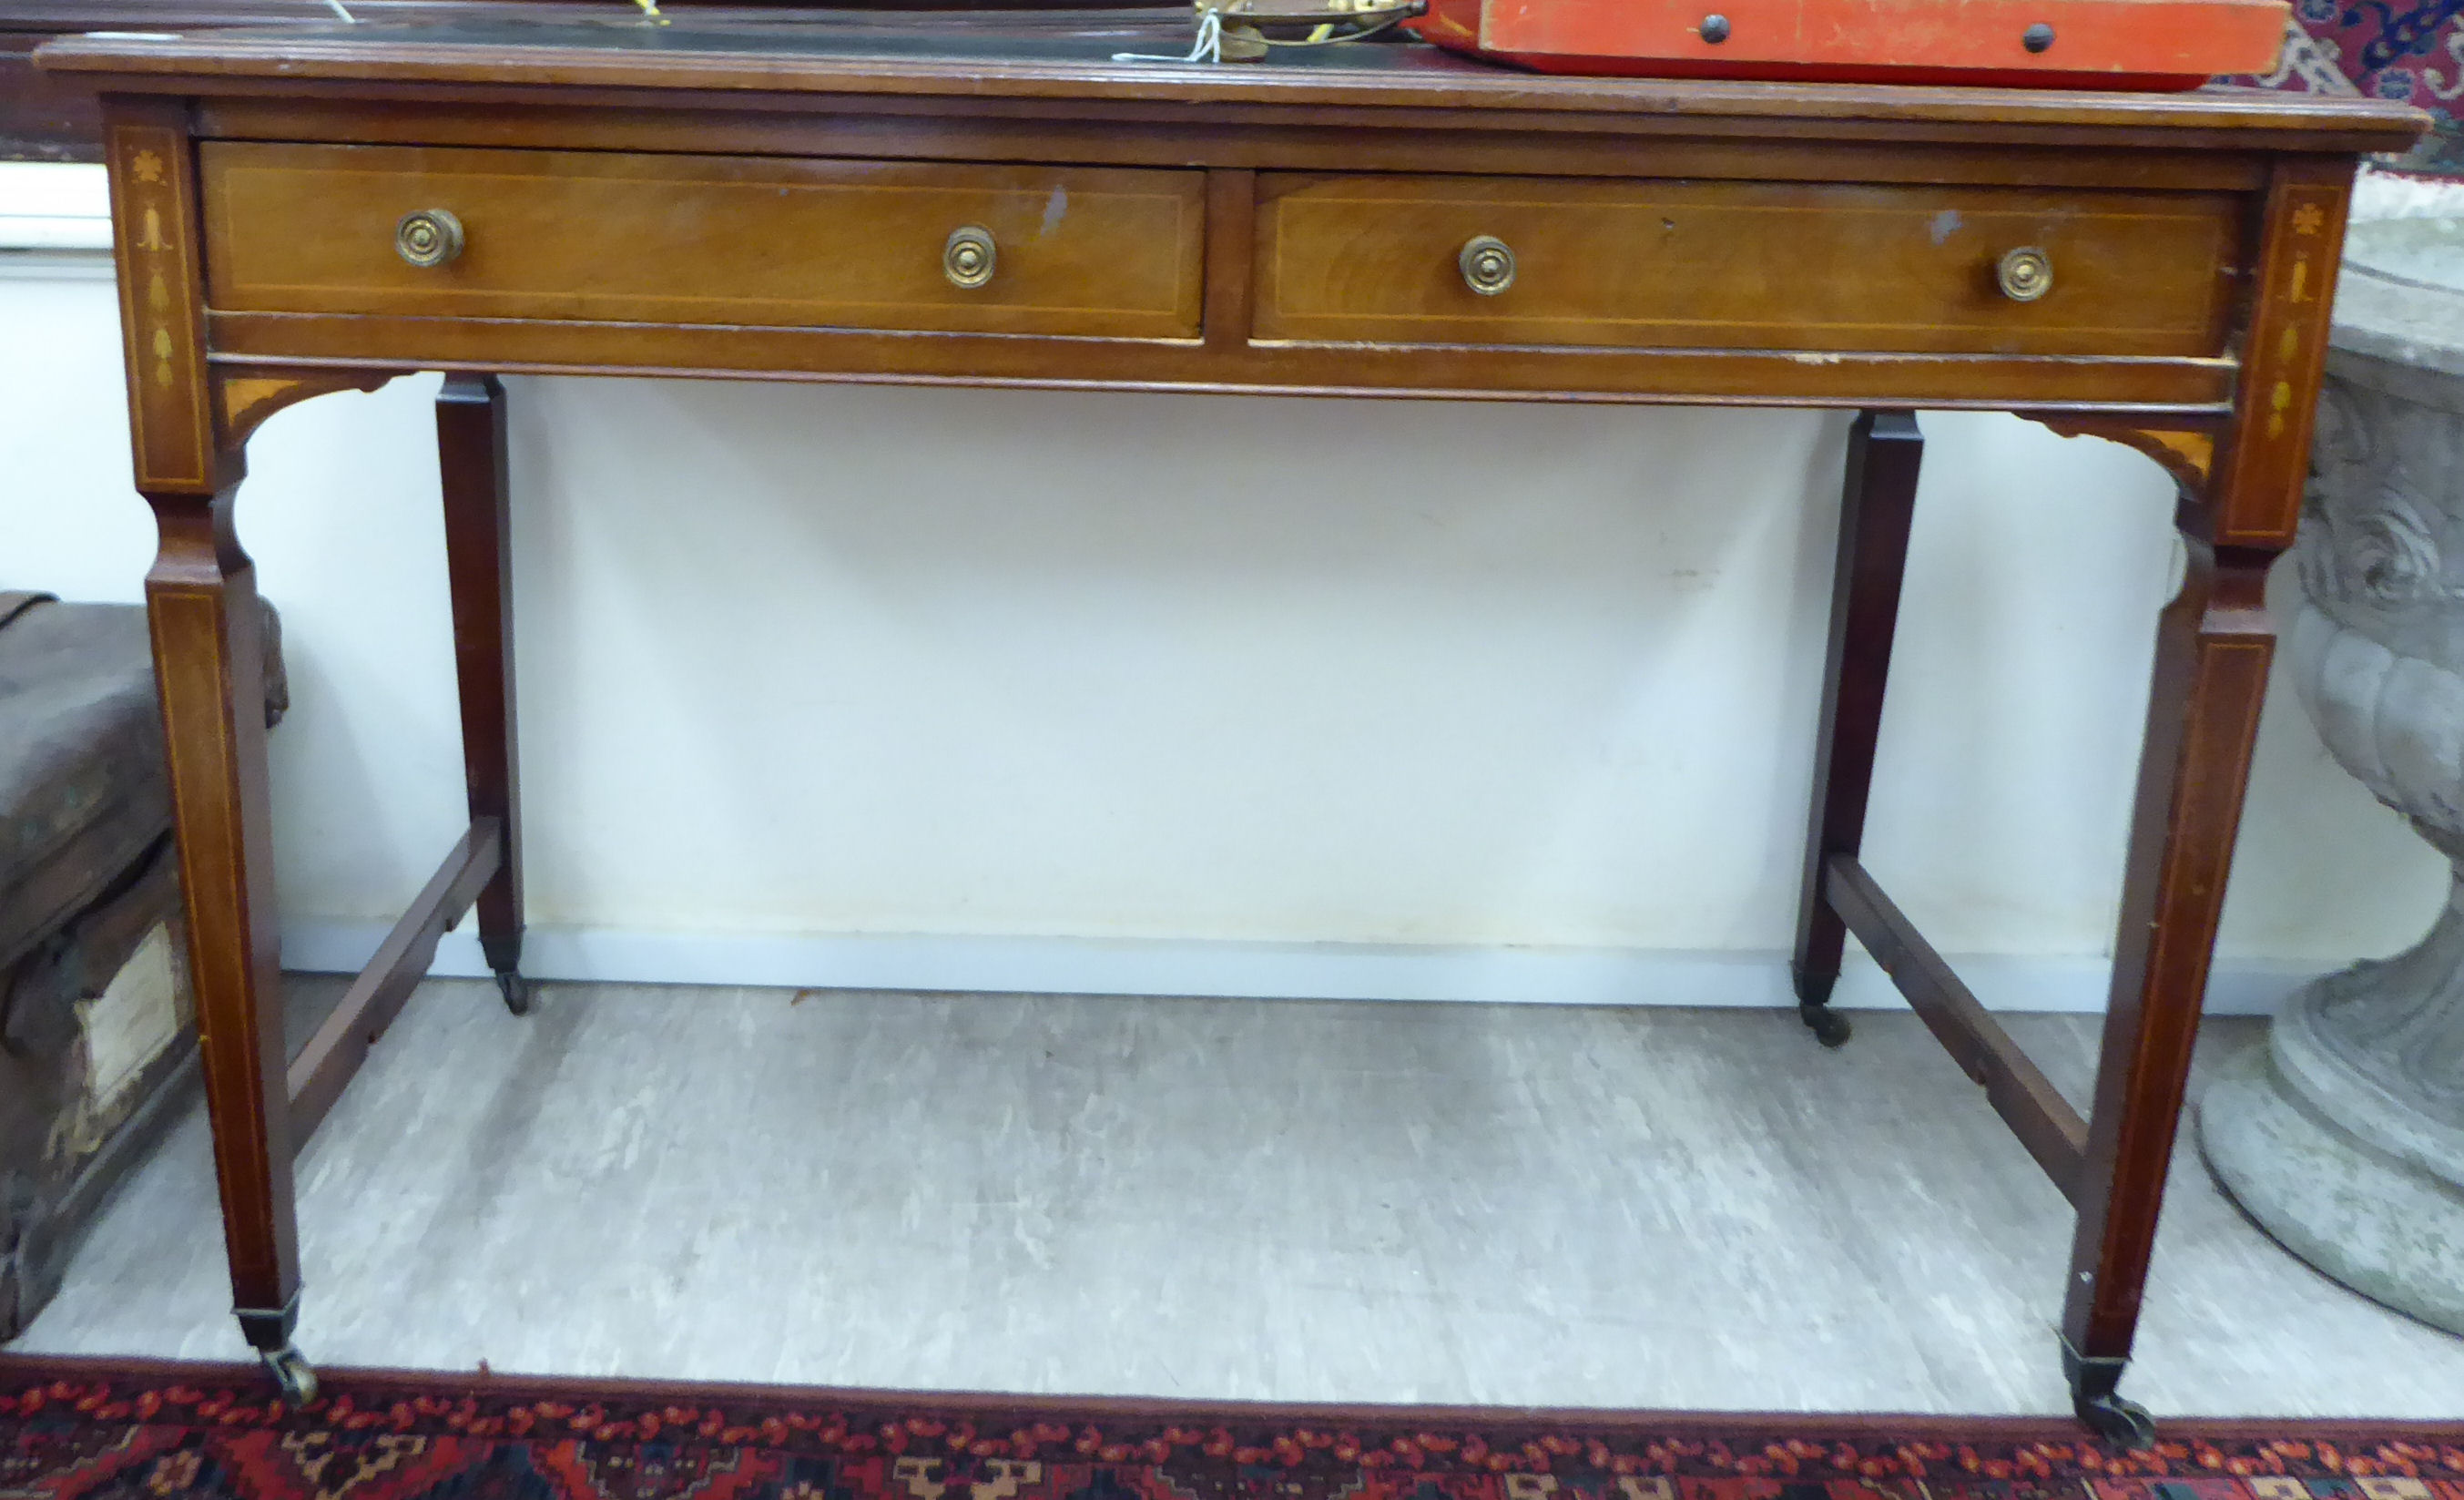 An Edwardian satinwood inlaid mahogany desk, the top set with a black hide scriber,